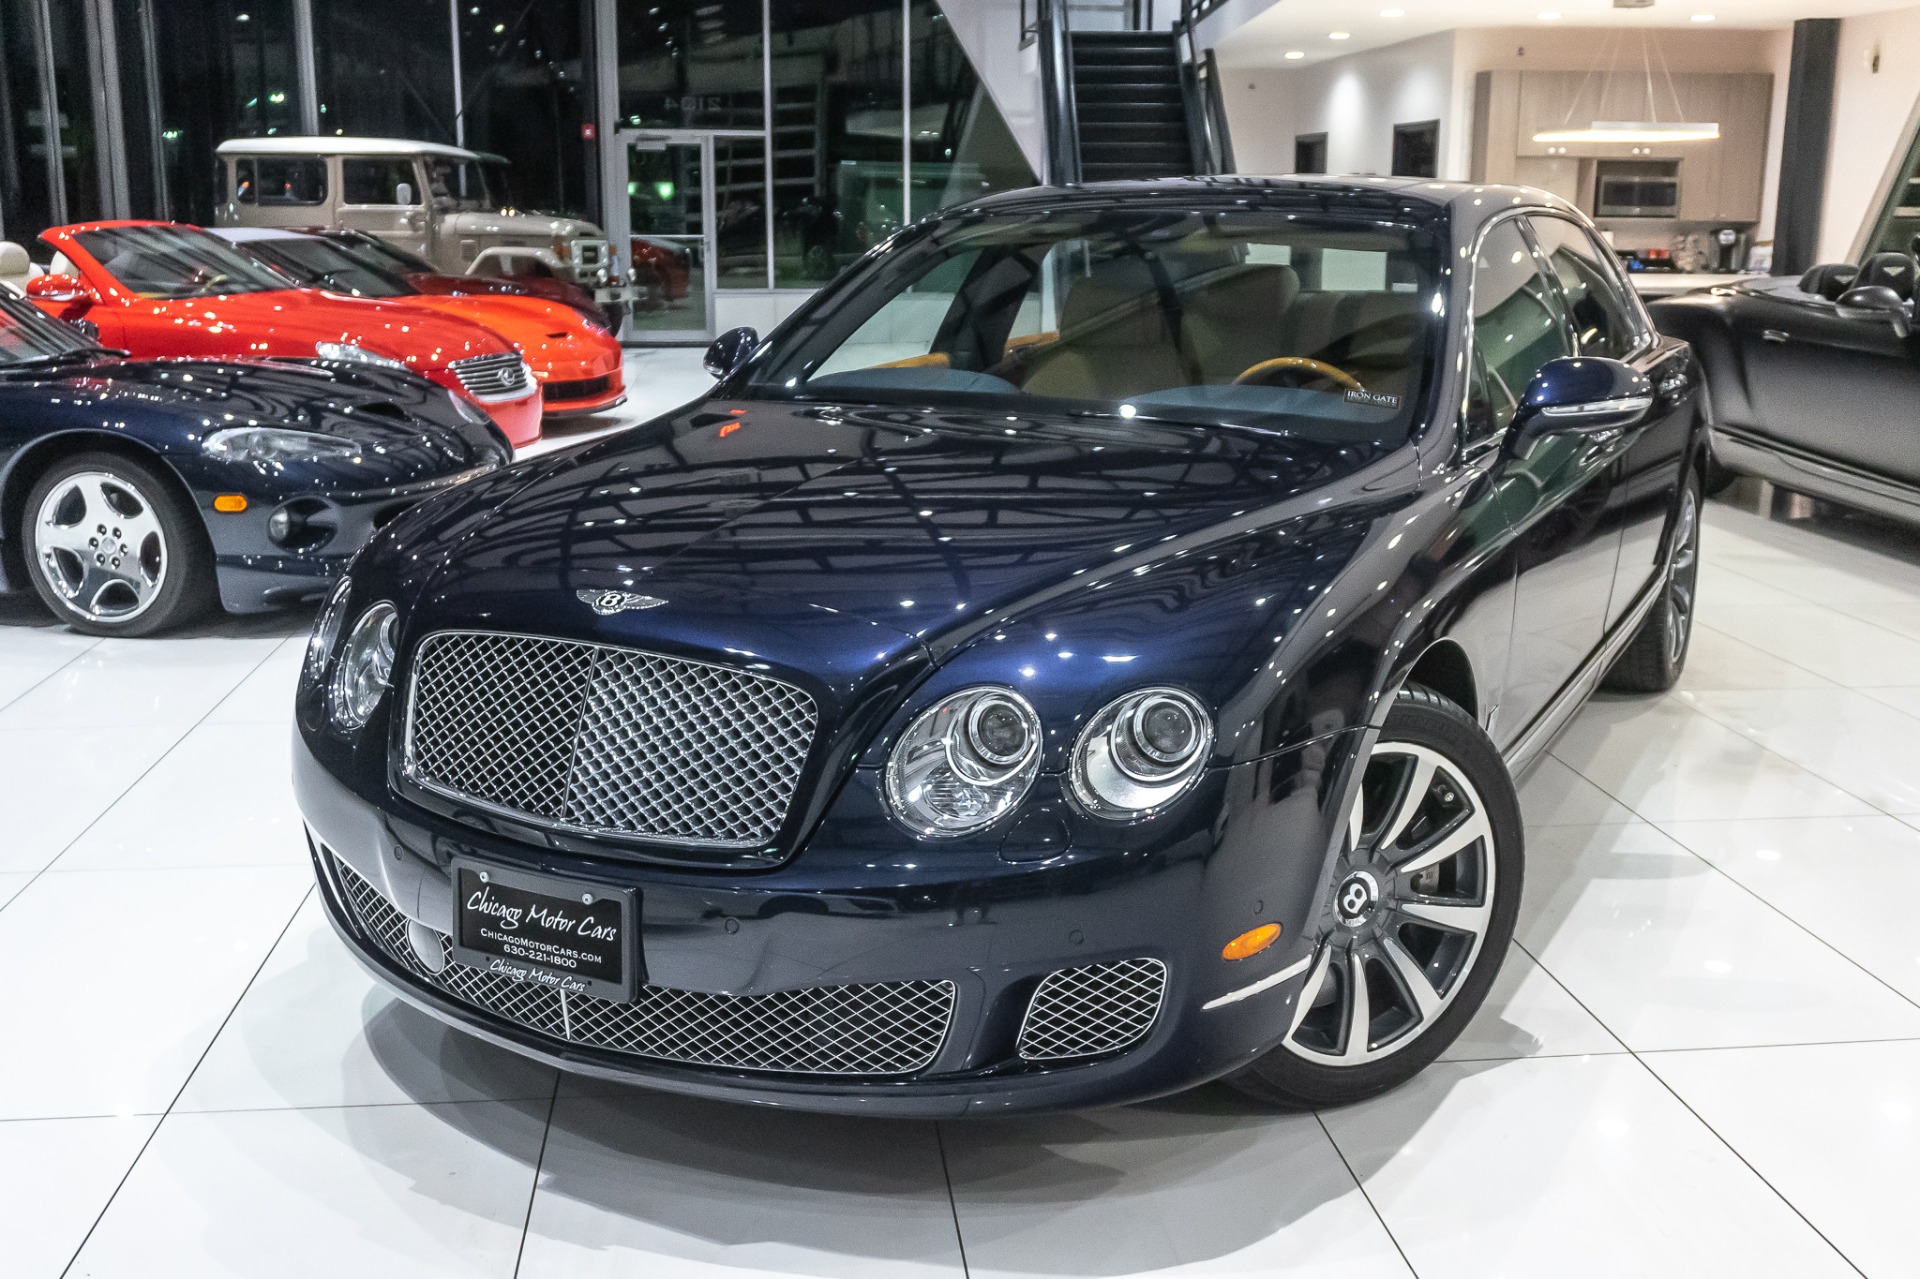 Used-2012-Bentley-Continental-Flying-Spur-Series-51-Edition-W12-AWD-Excellent-Condition-Fully-Serviced